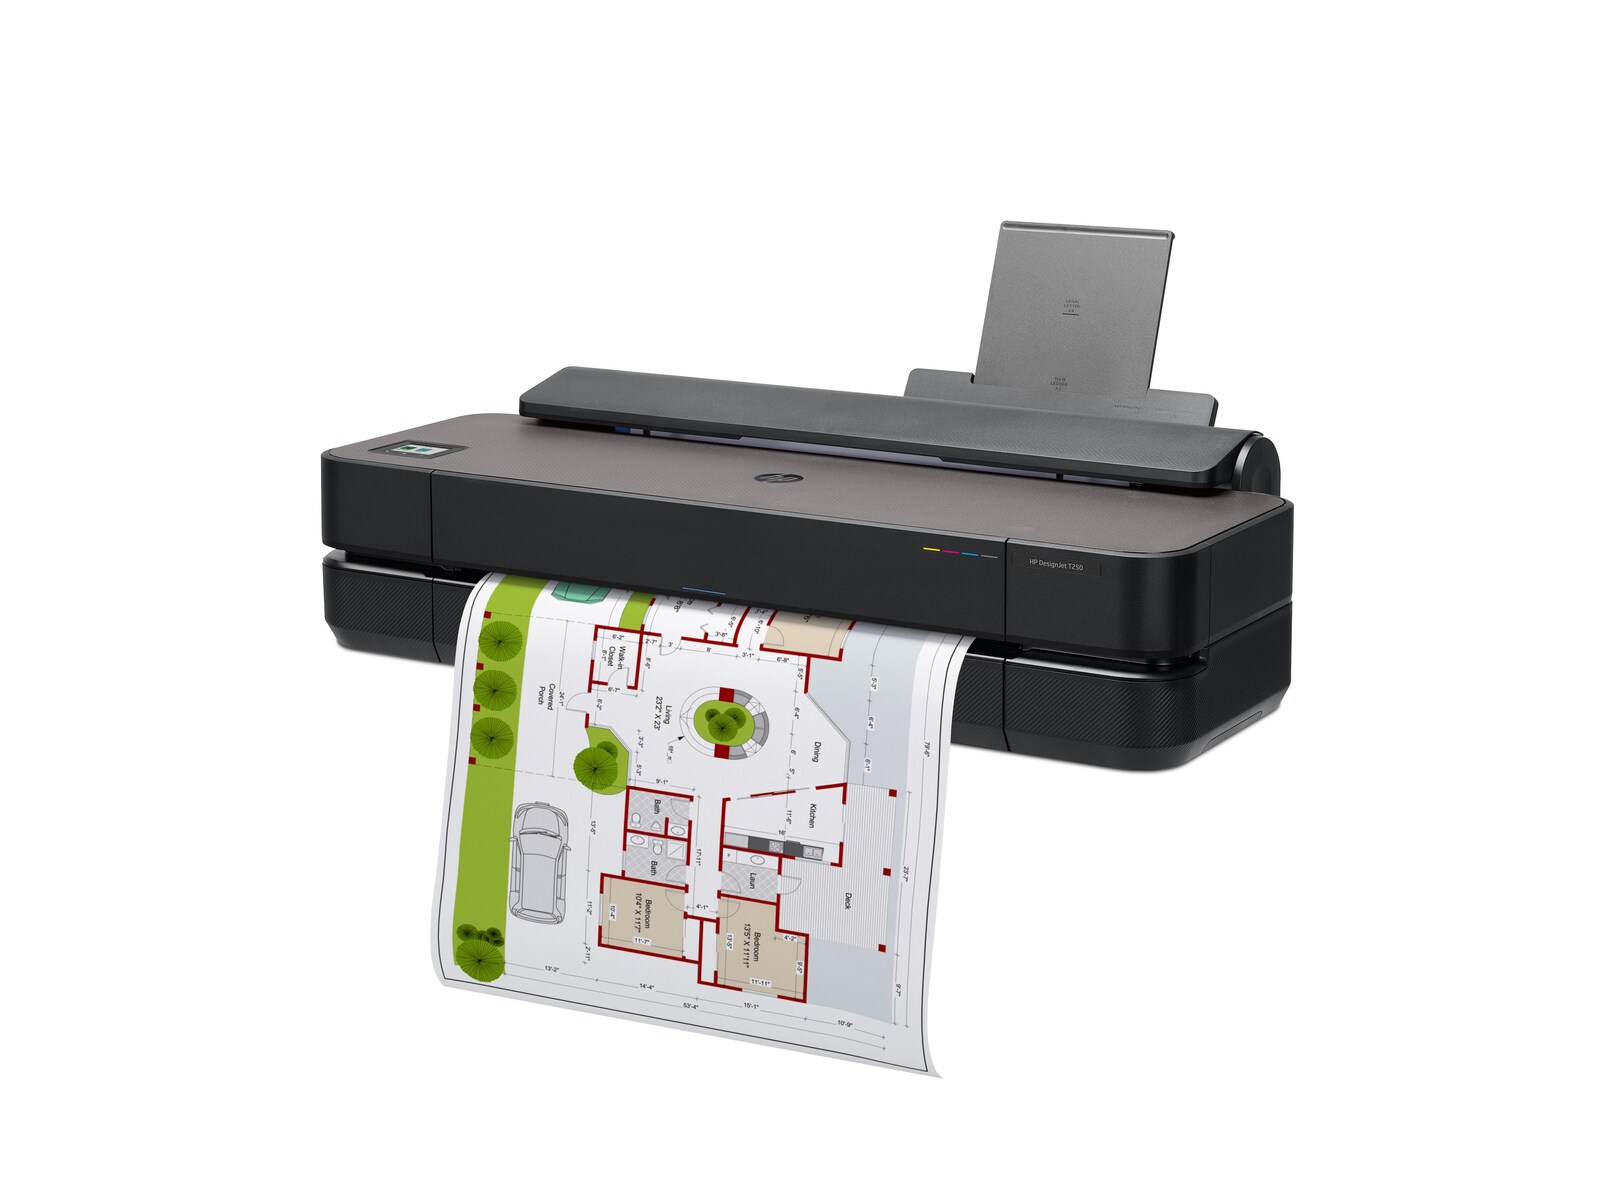 Key features to look for when buying a 24-inch printer plotter